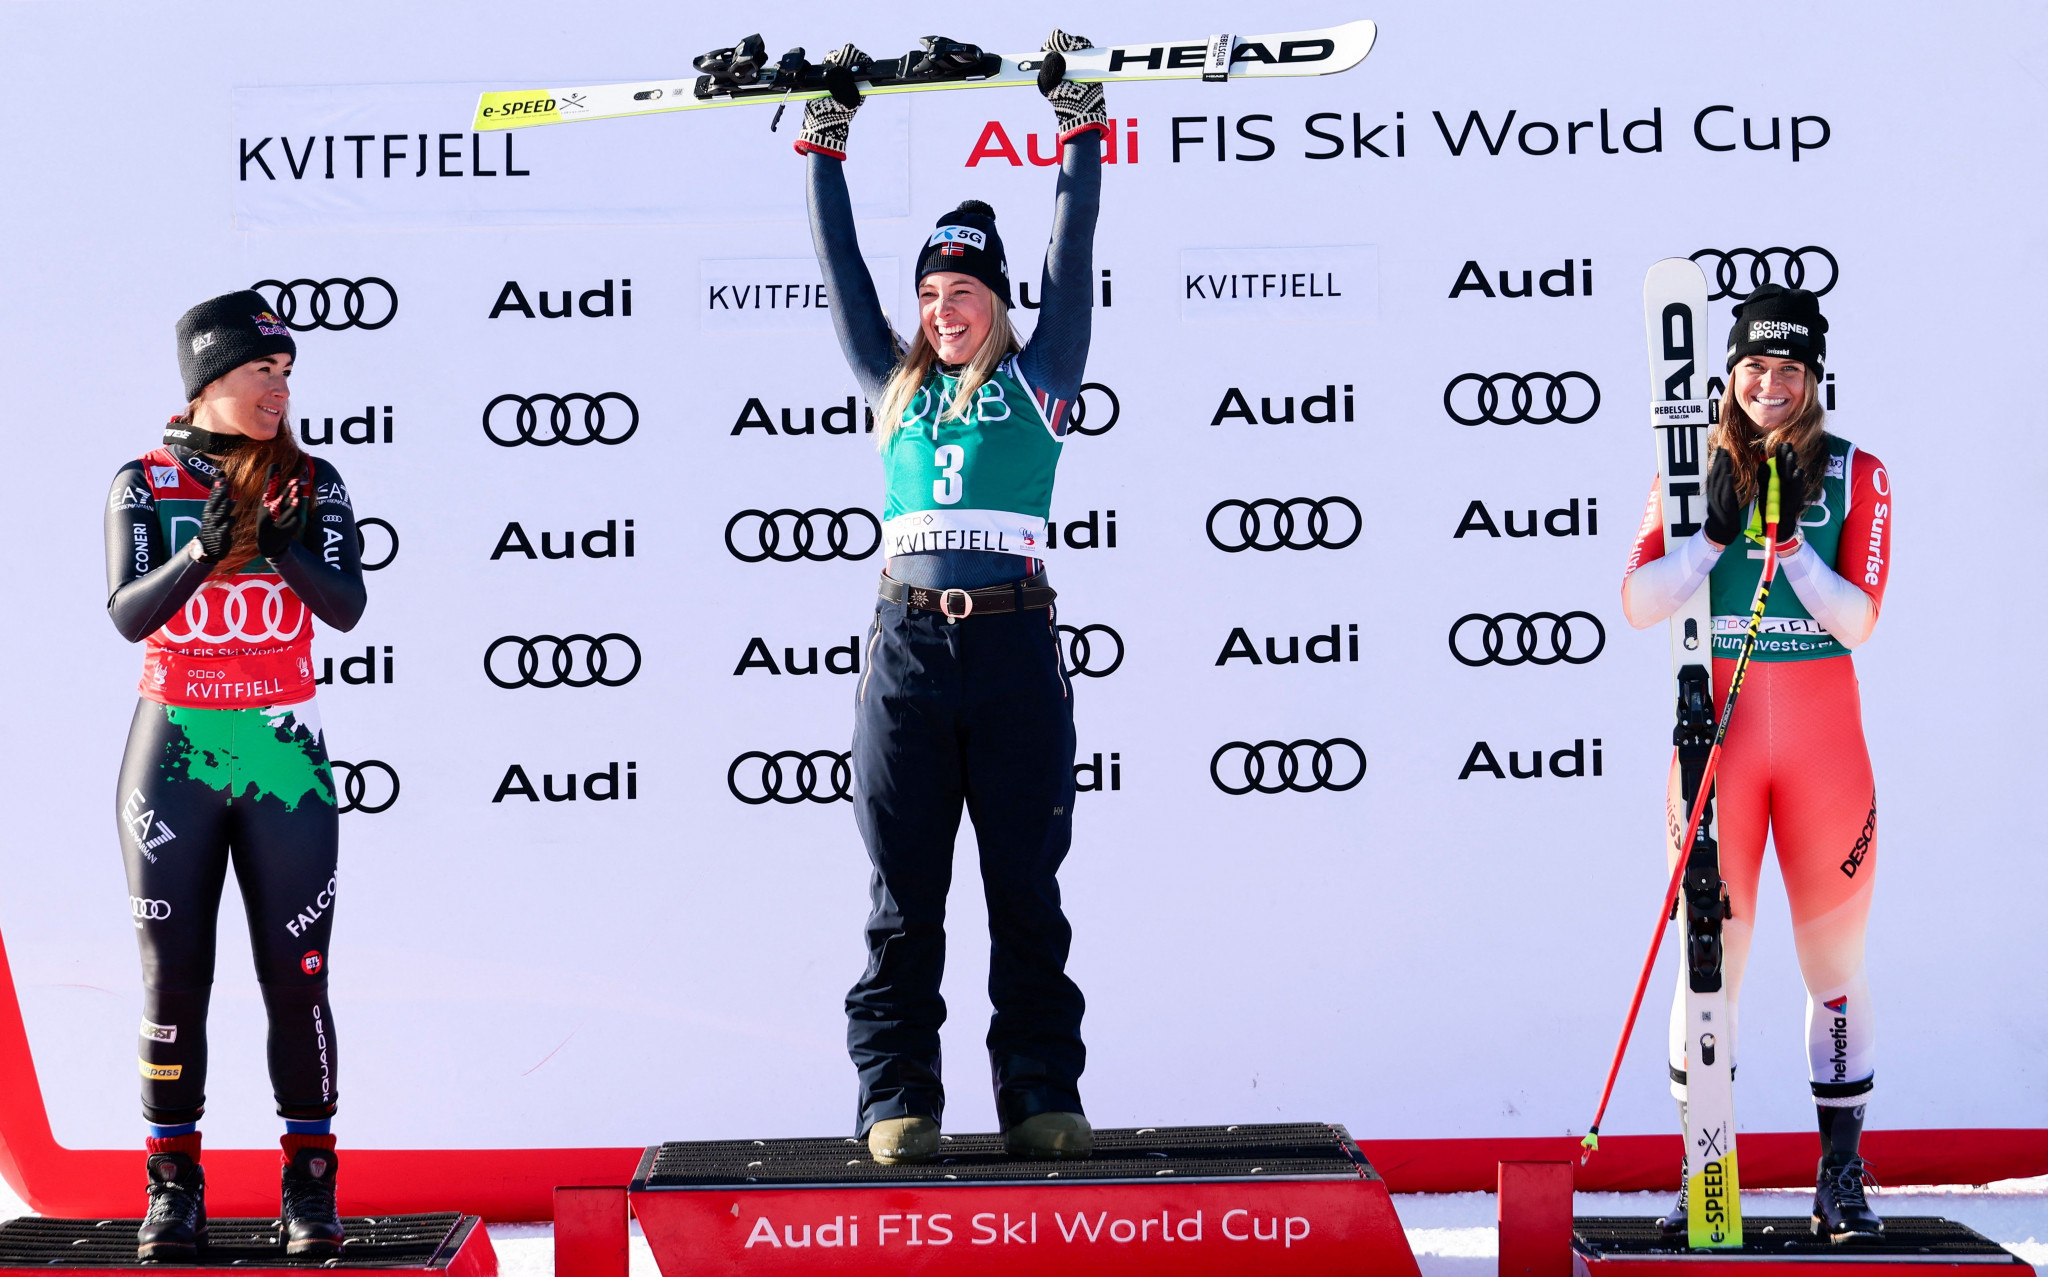 Vickhoff Lie becomes first Norwegian skier to win Alpine Skiing World Cup downhill with home success in Kvitfjell